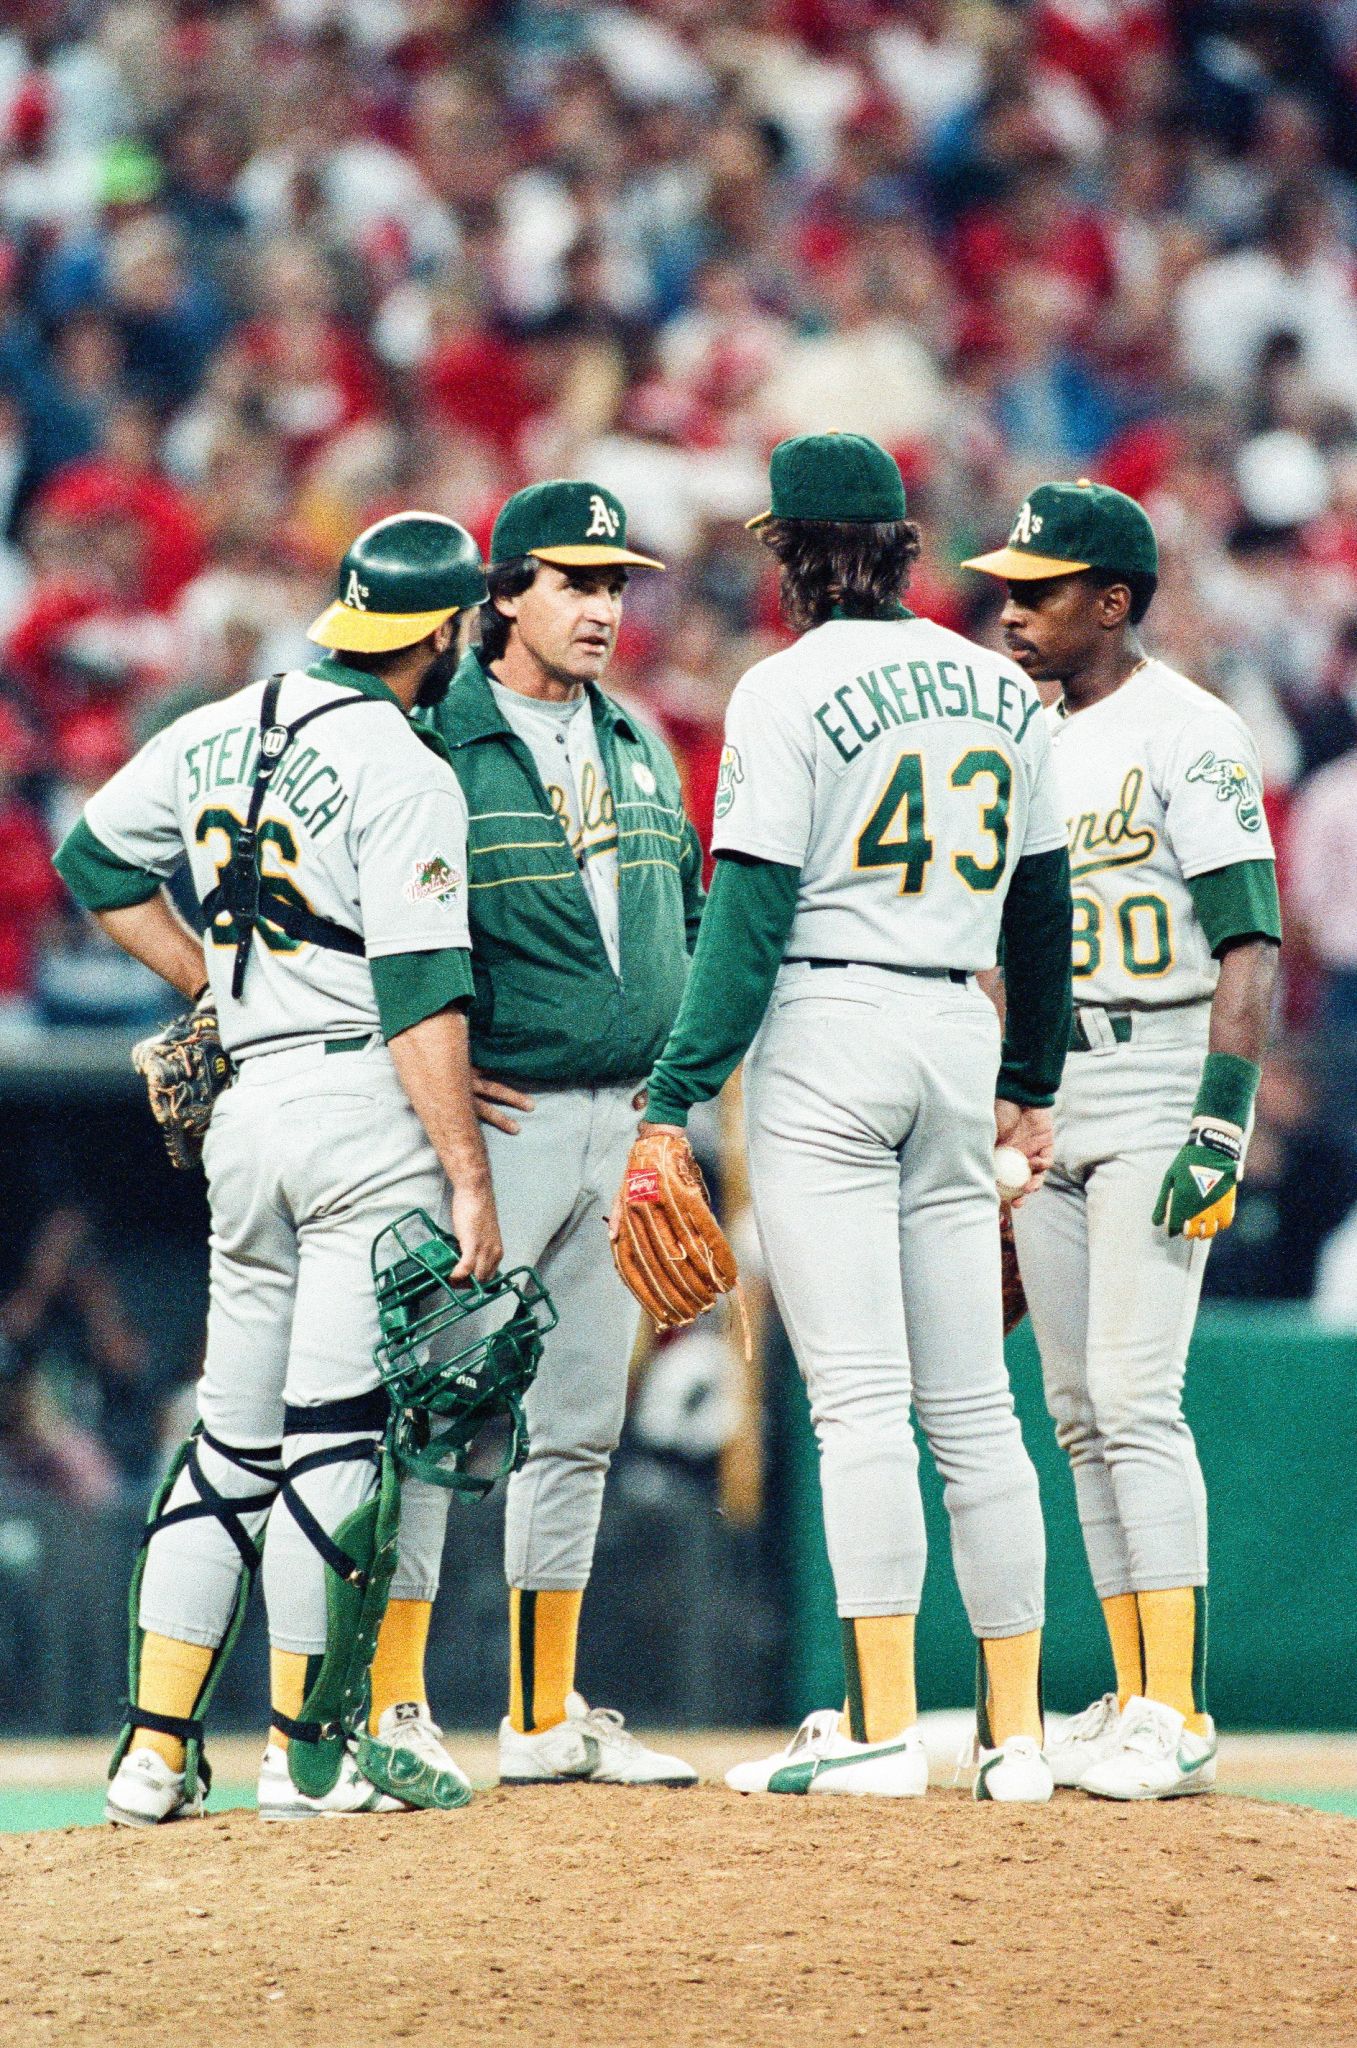 1990 World Series Game #4: Reds at A's 